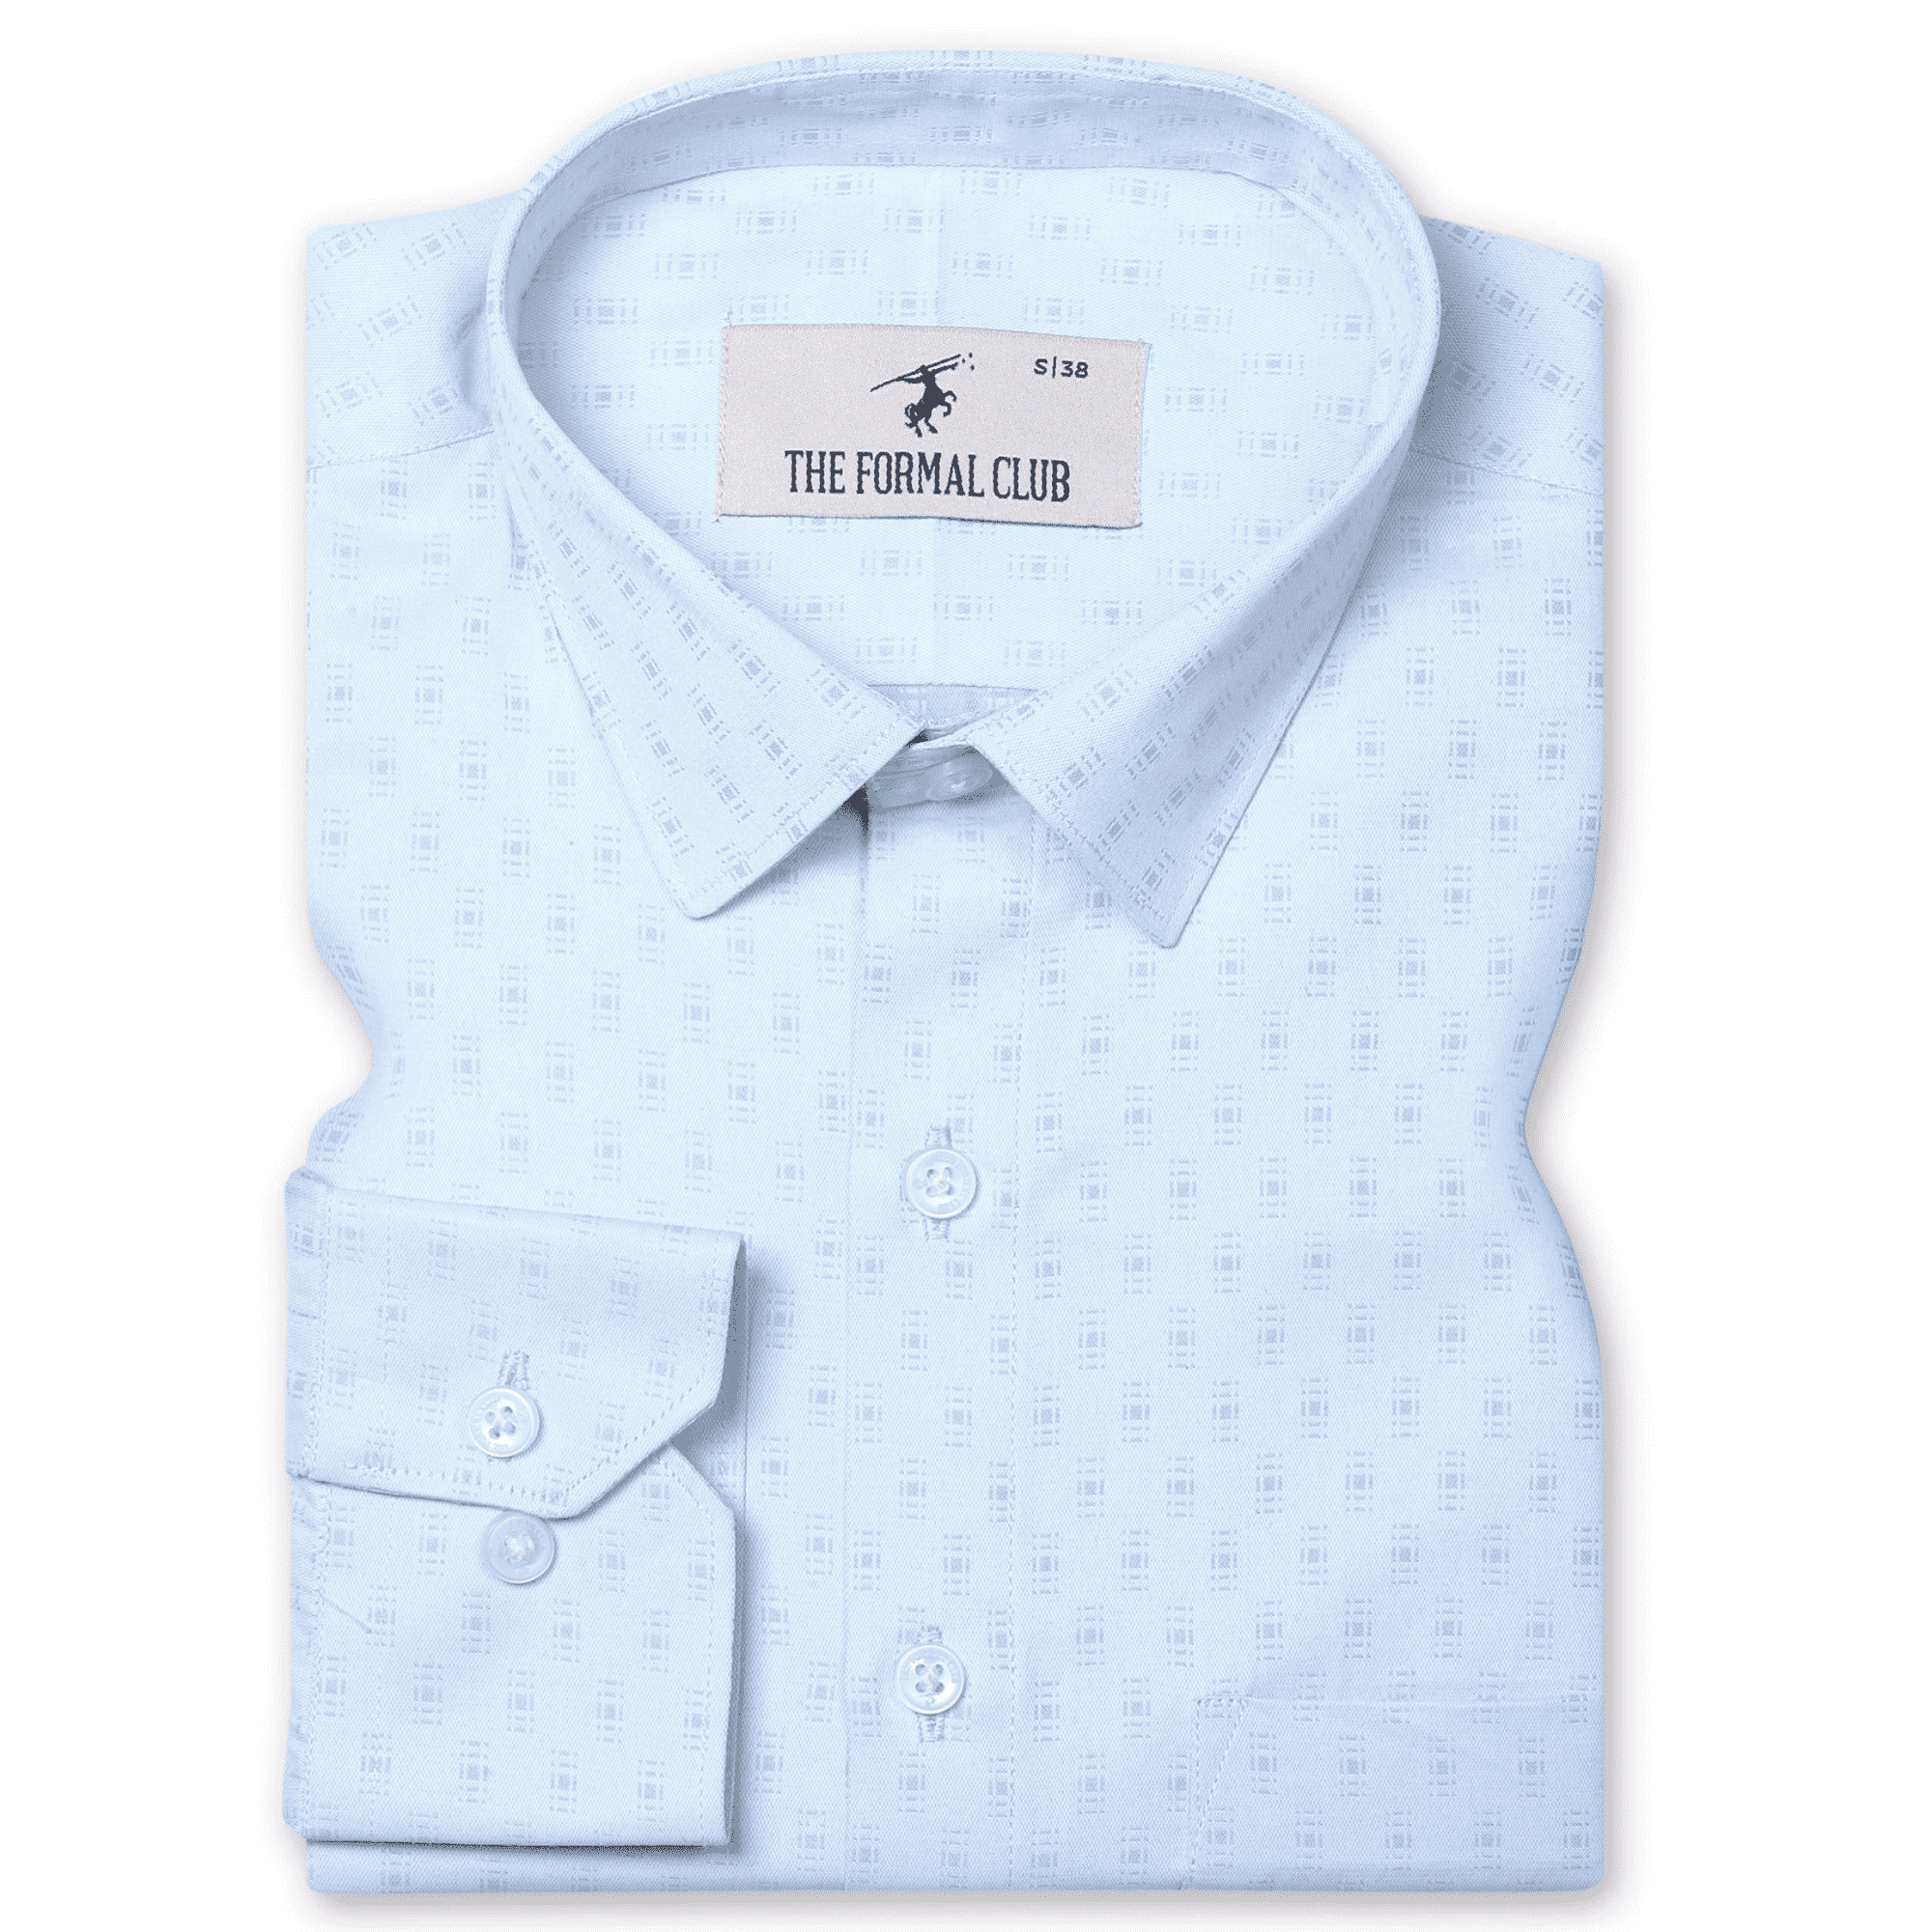 Lisbon Turquoise Textured Shirt - The Formal Club